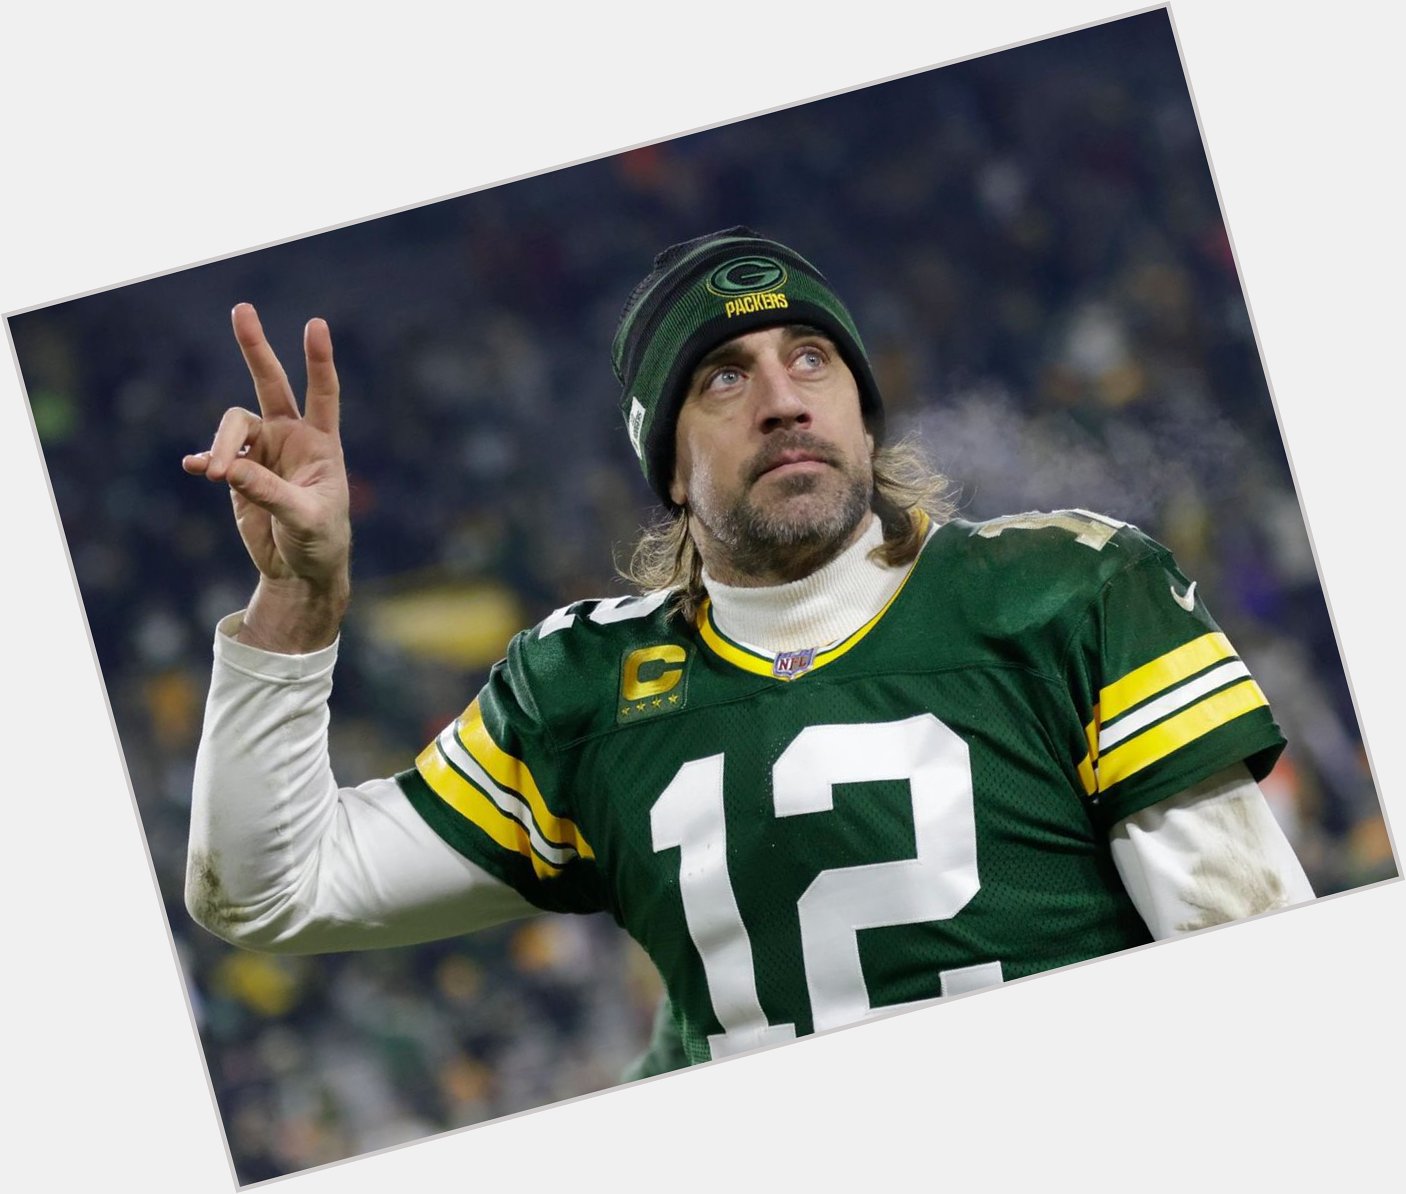 Happy 39th birthday to the goat himself, aaron rodgers 